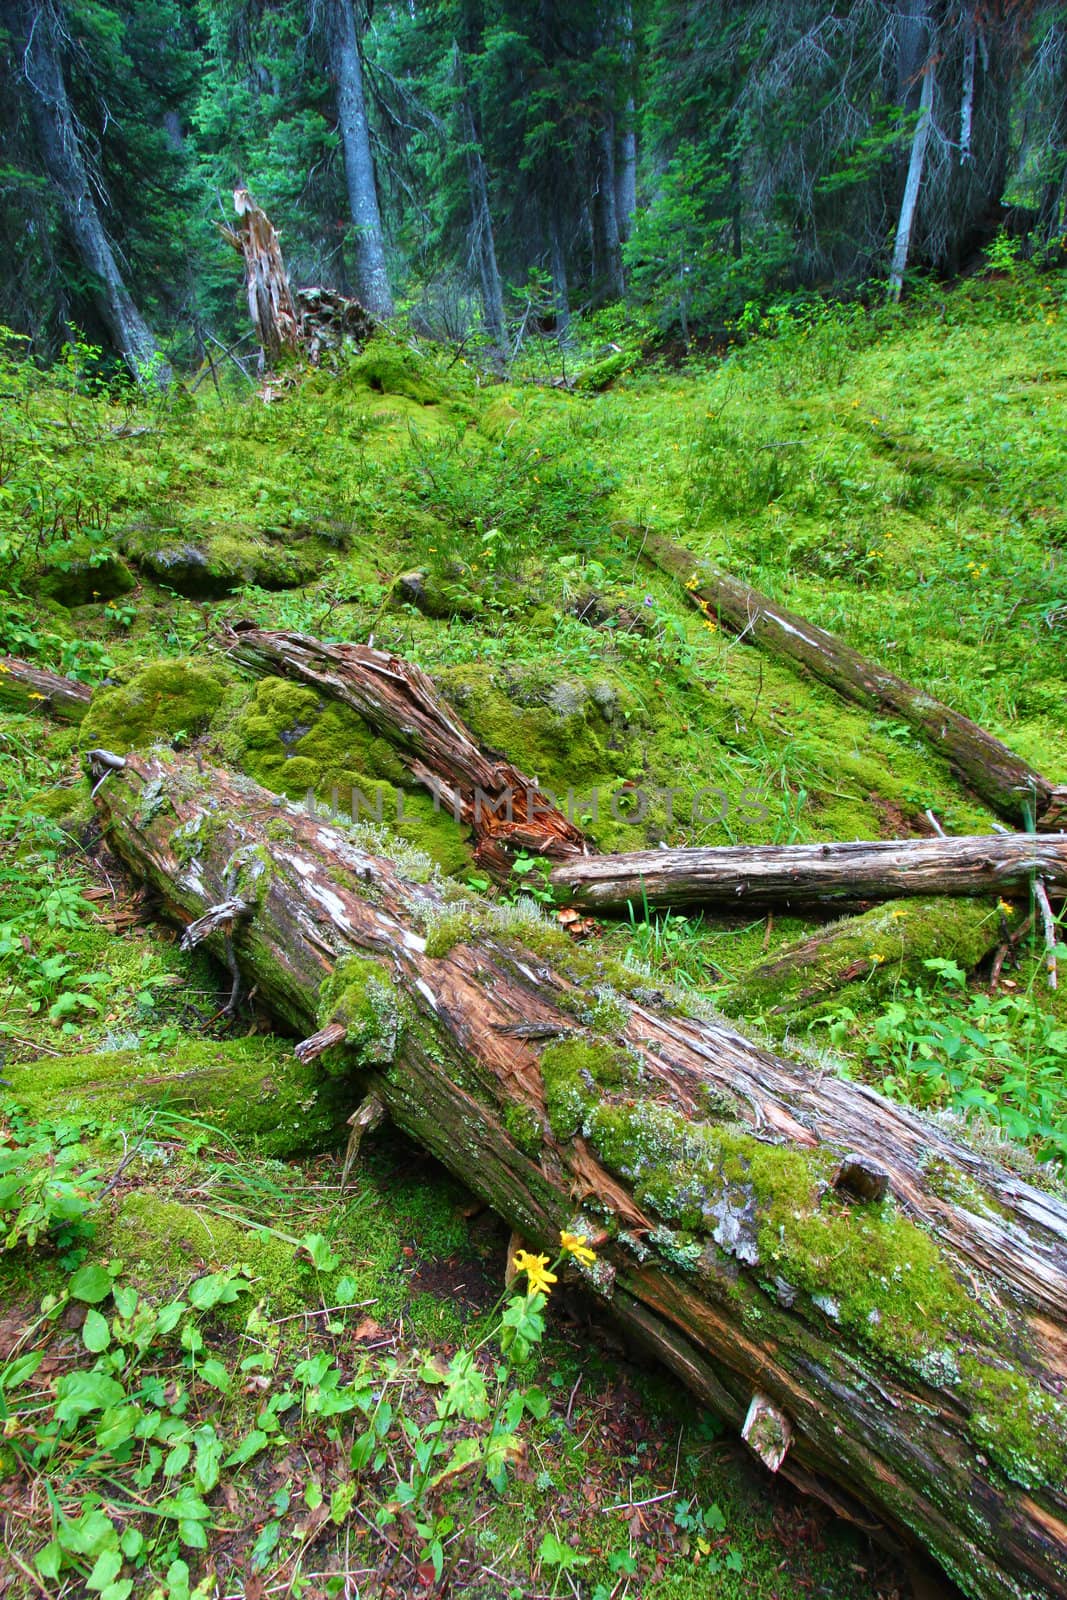 Forest floor of Yoho National Park in British Columbia - Canada.